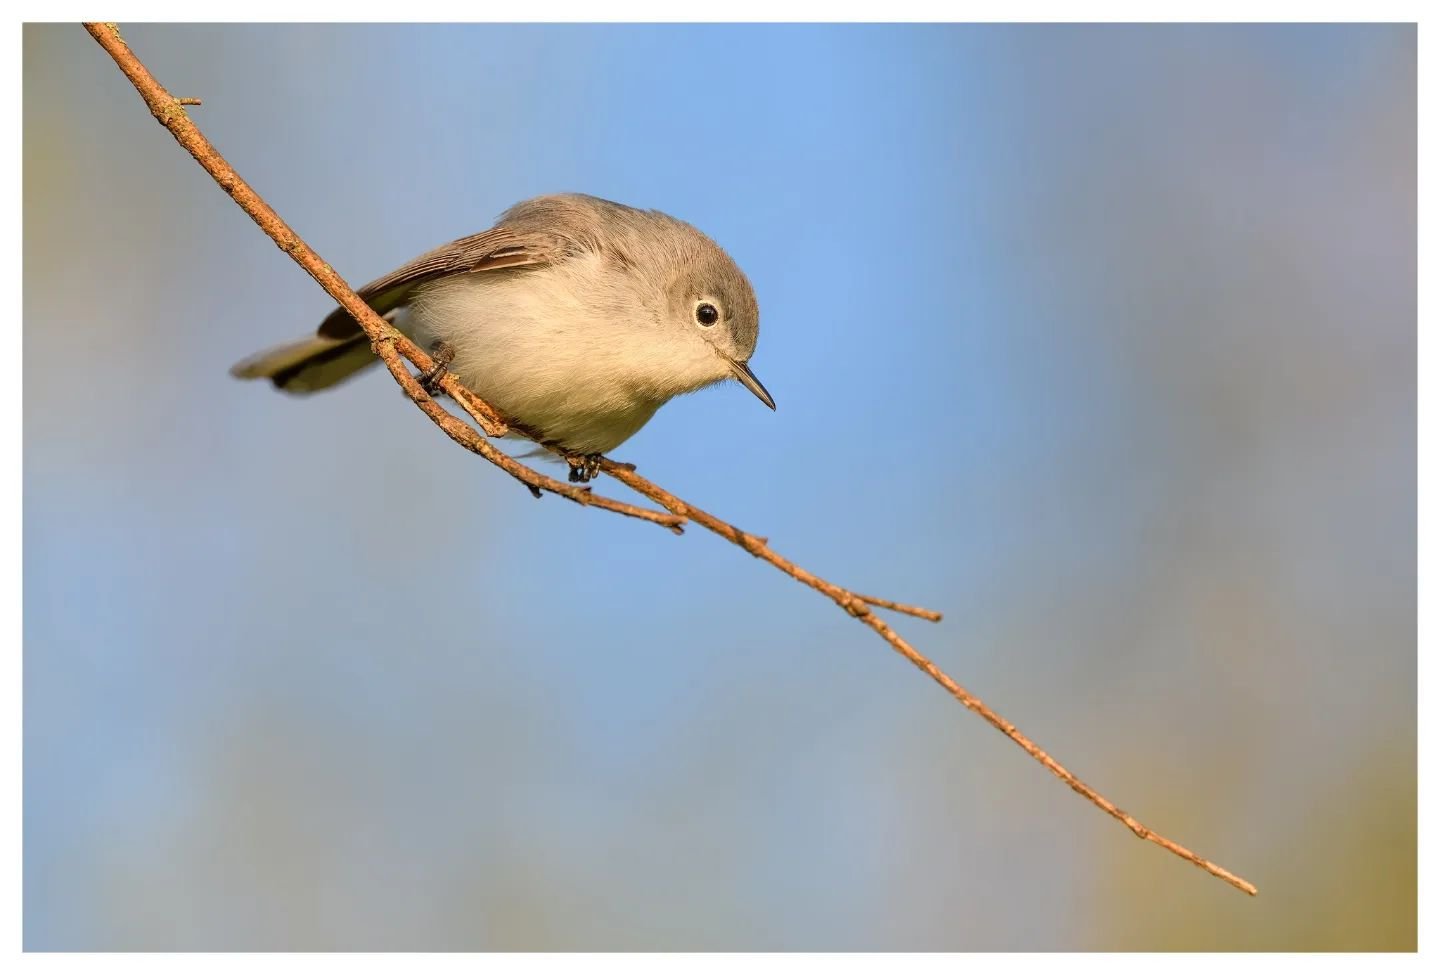 Blue Grey Gnatcatcher 
.
.
.
.
Being able to get out and photograph birds at sunrise before work is both envigorating and meditative at the same time. Spring Migration is in full swing, and the amount of Blue Grey Gnatcatchers at Spring Valley Wildli